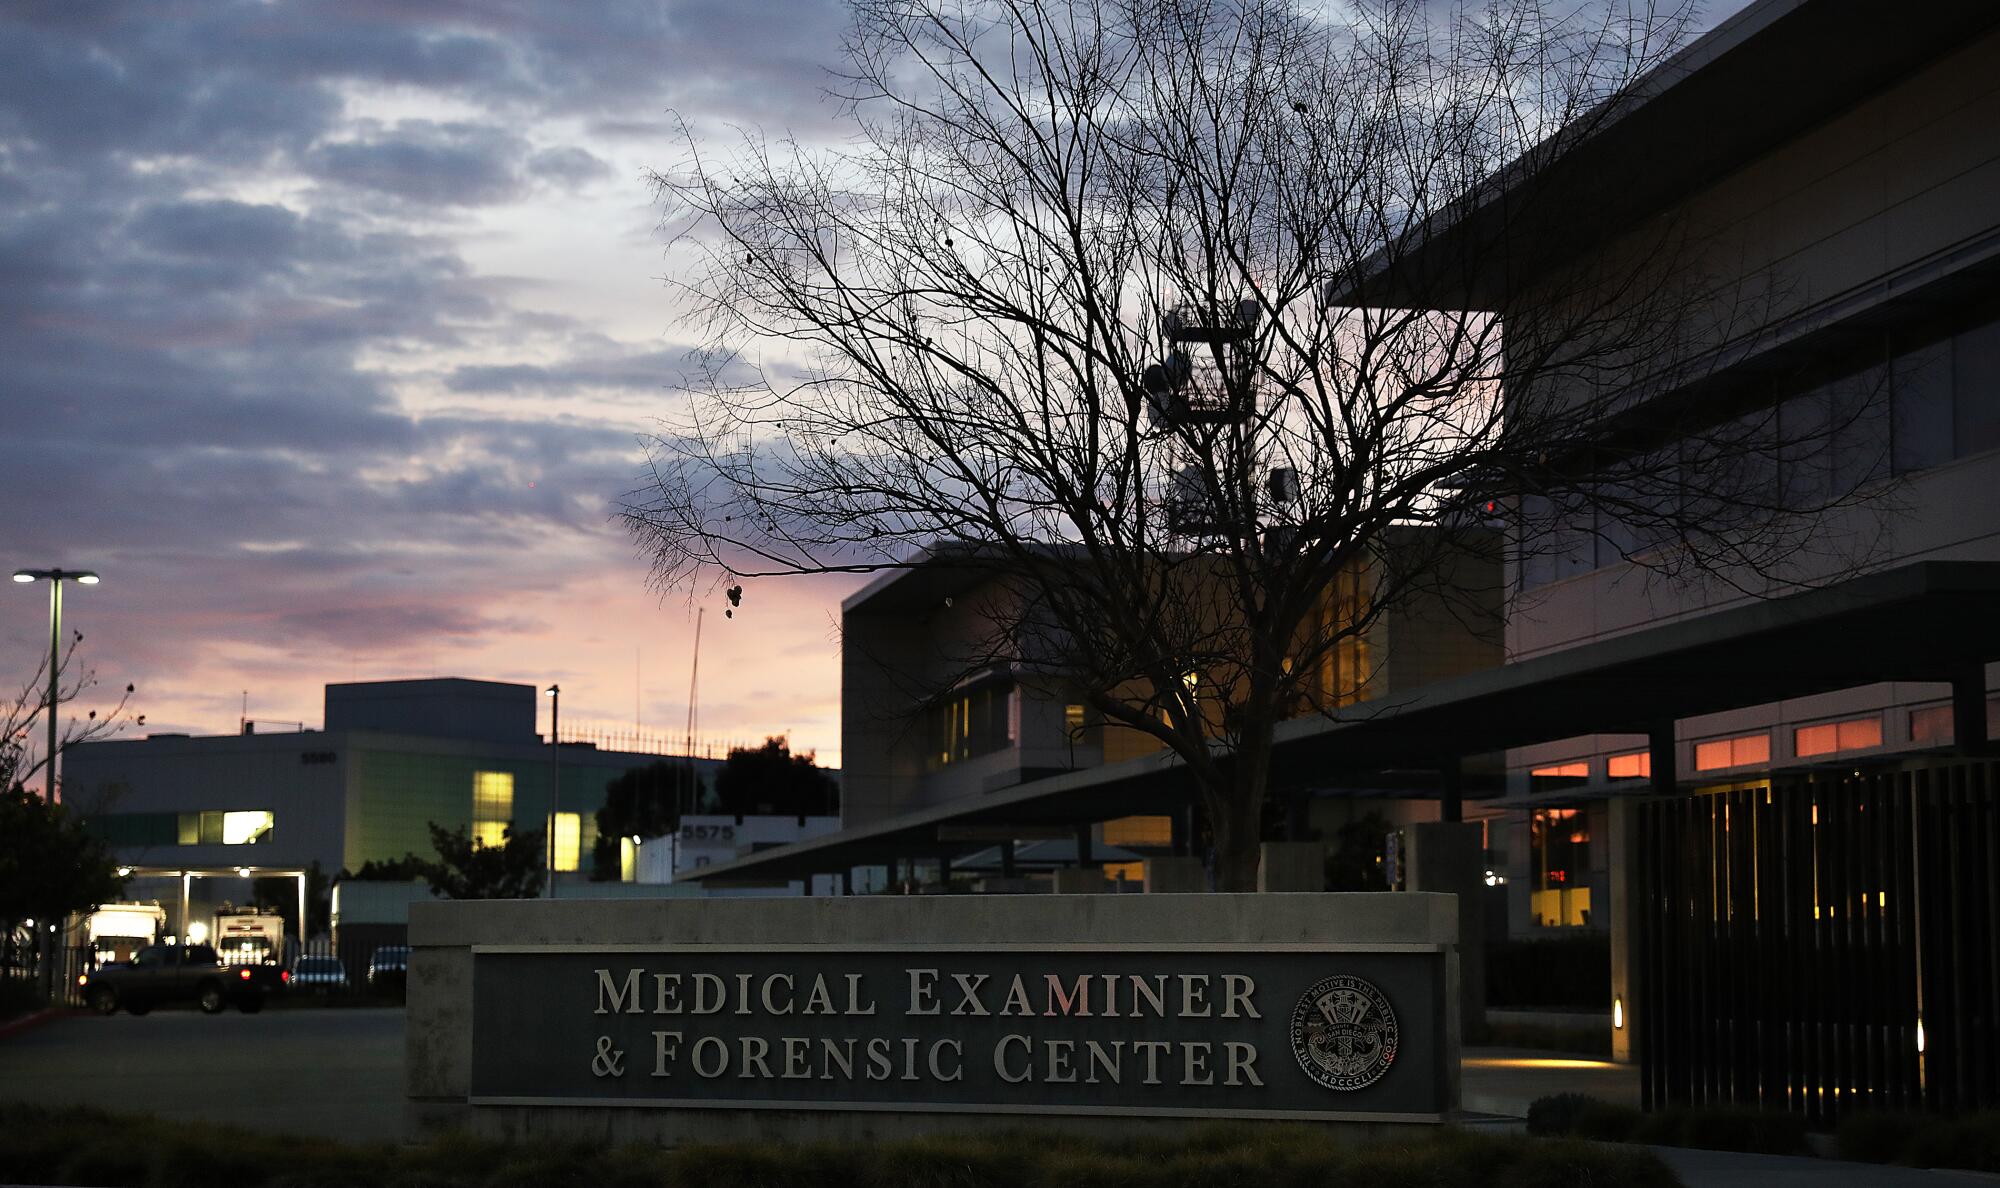 The San Diego County medical examiner's office.